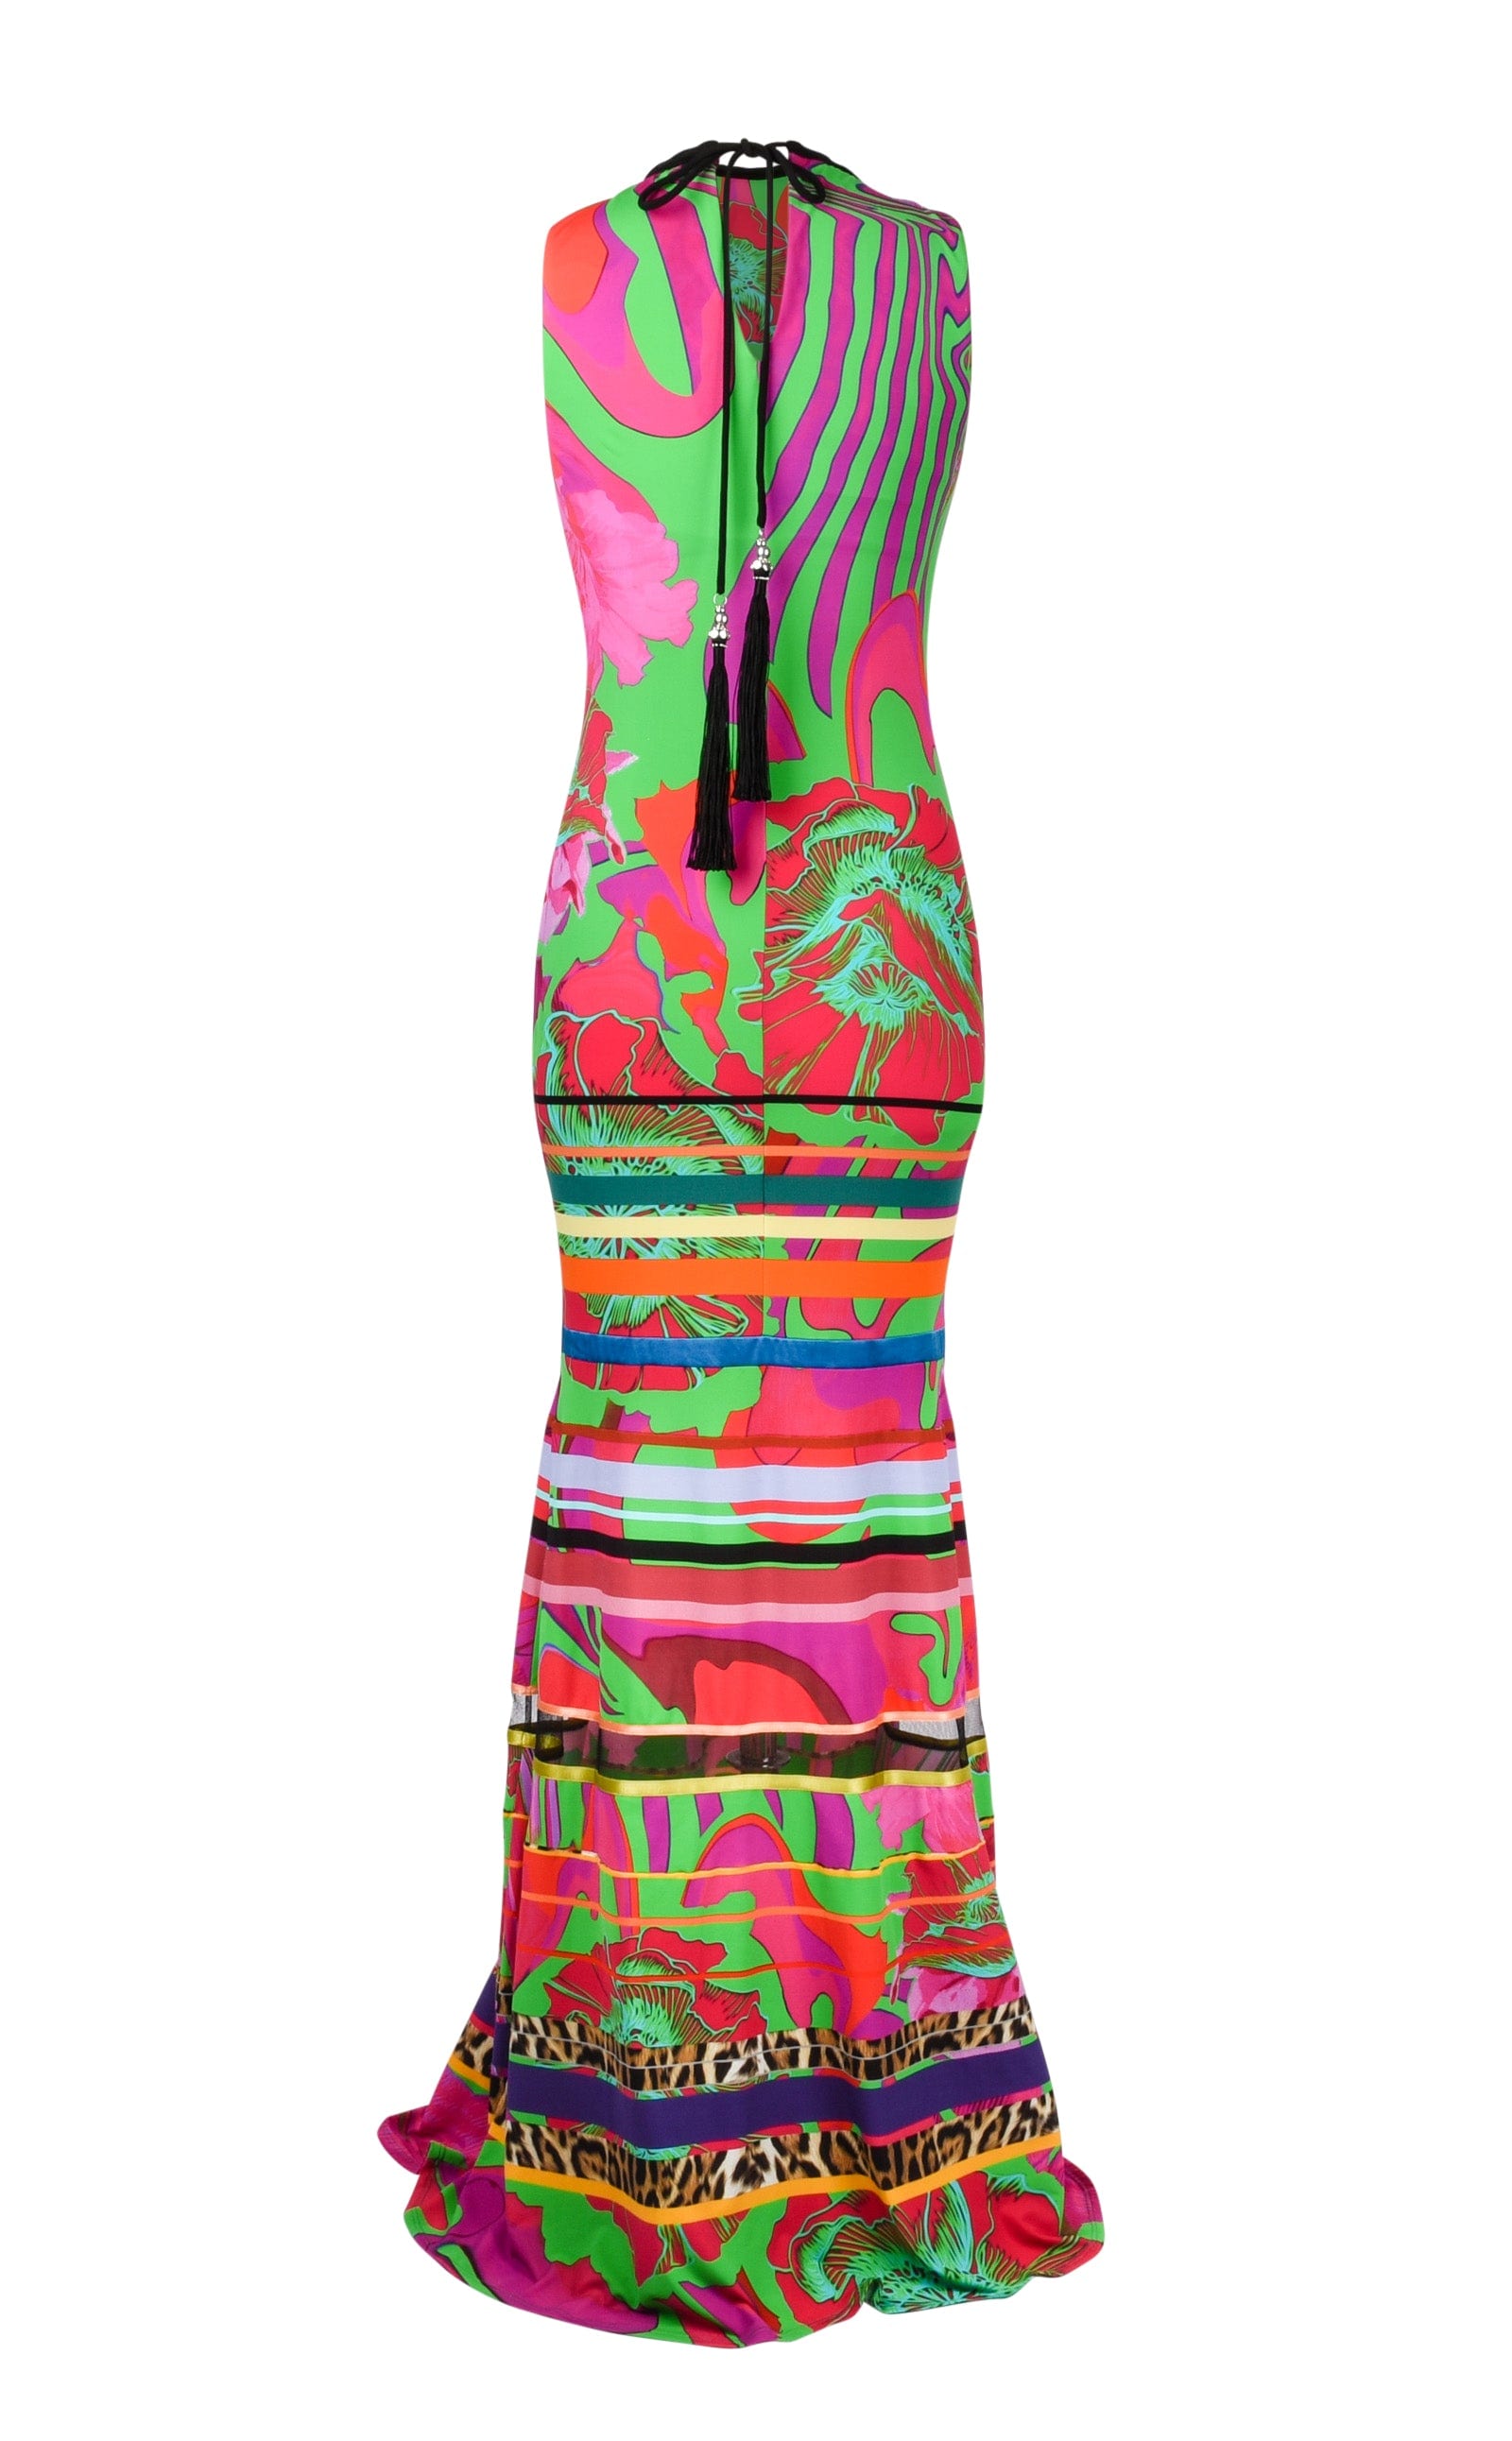 Roberto Cavalli Dress Floor Length Exotic Floral Print Tropical Colours 8 - mightychic